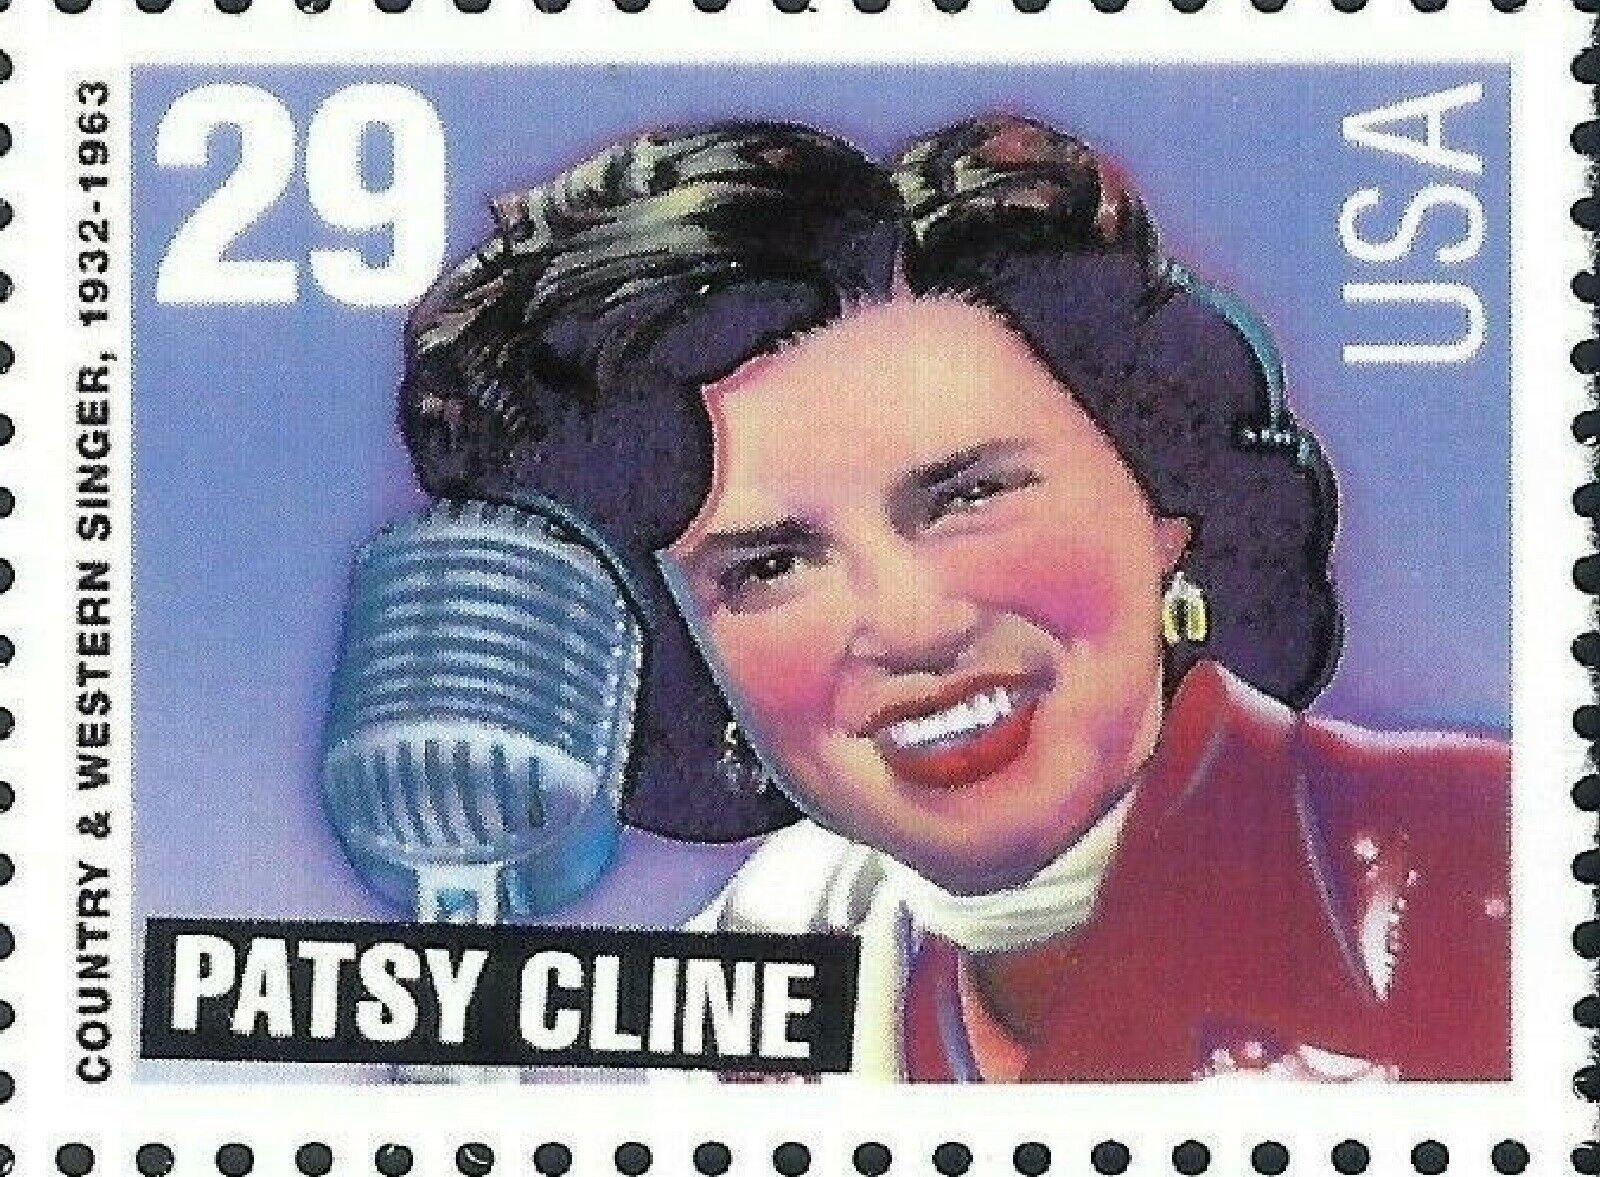 Primary image for 1991 country Music Legend Patsy Cline 29 cent stamp scott# 2771-74 Buy now yes .